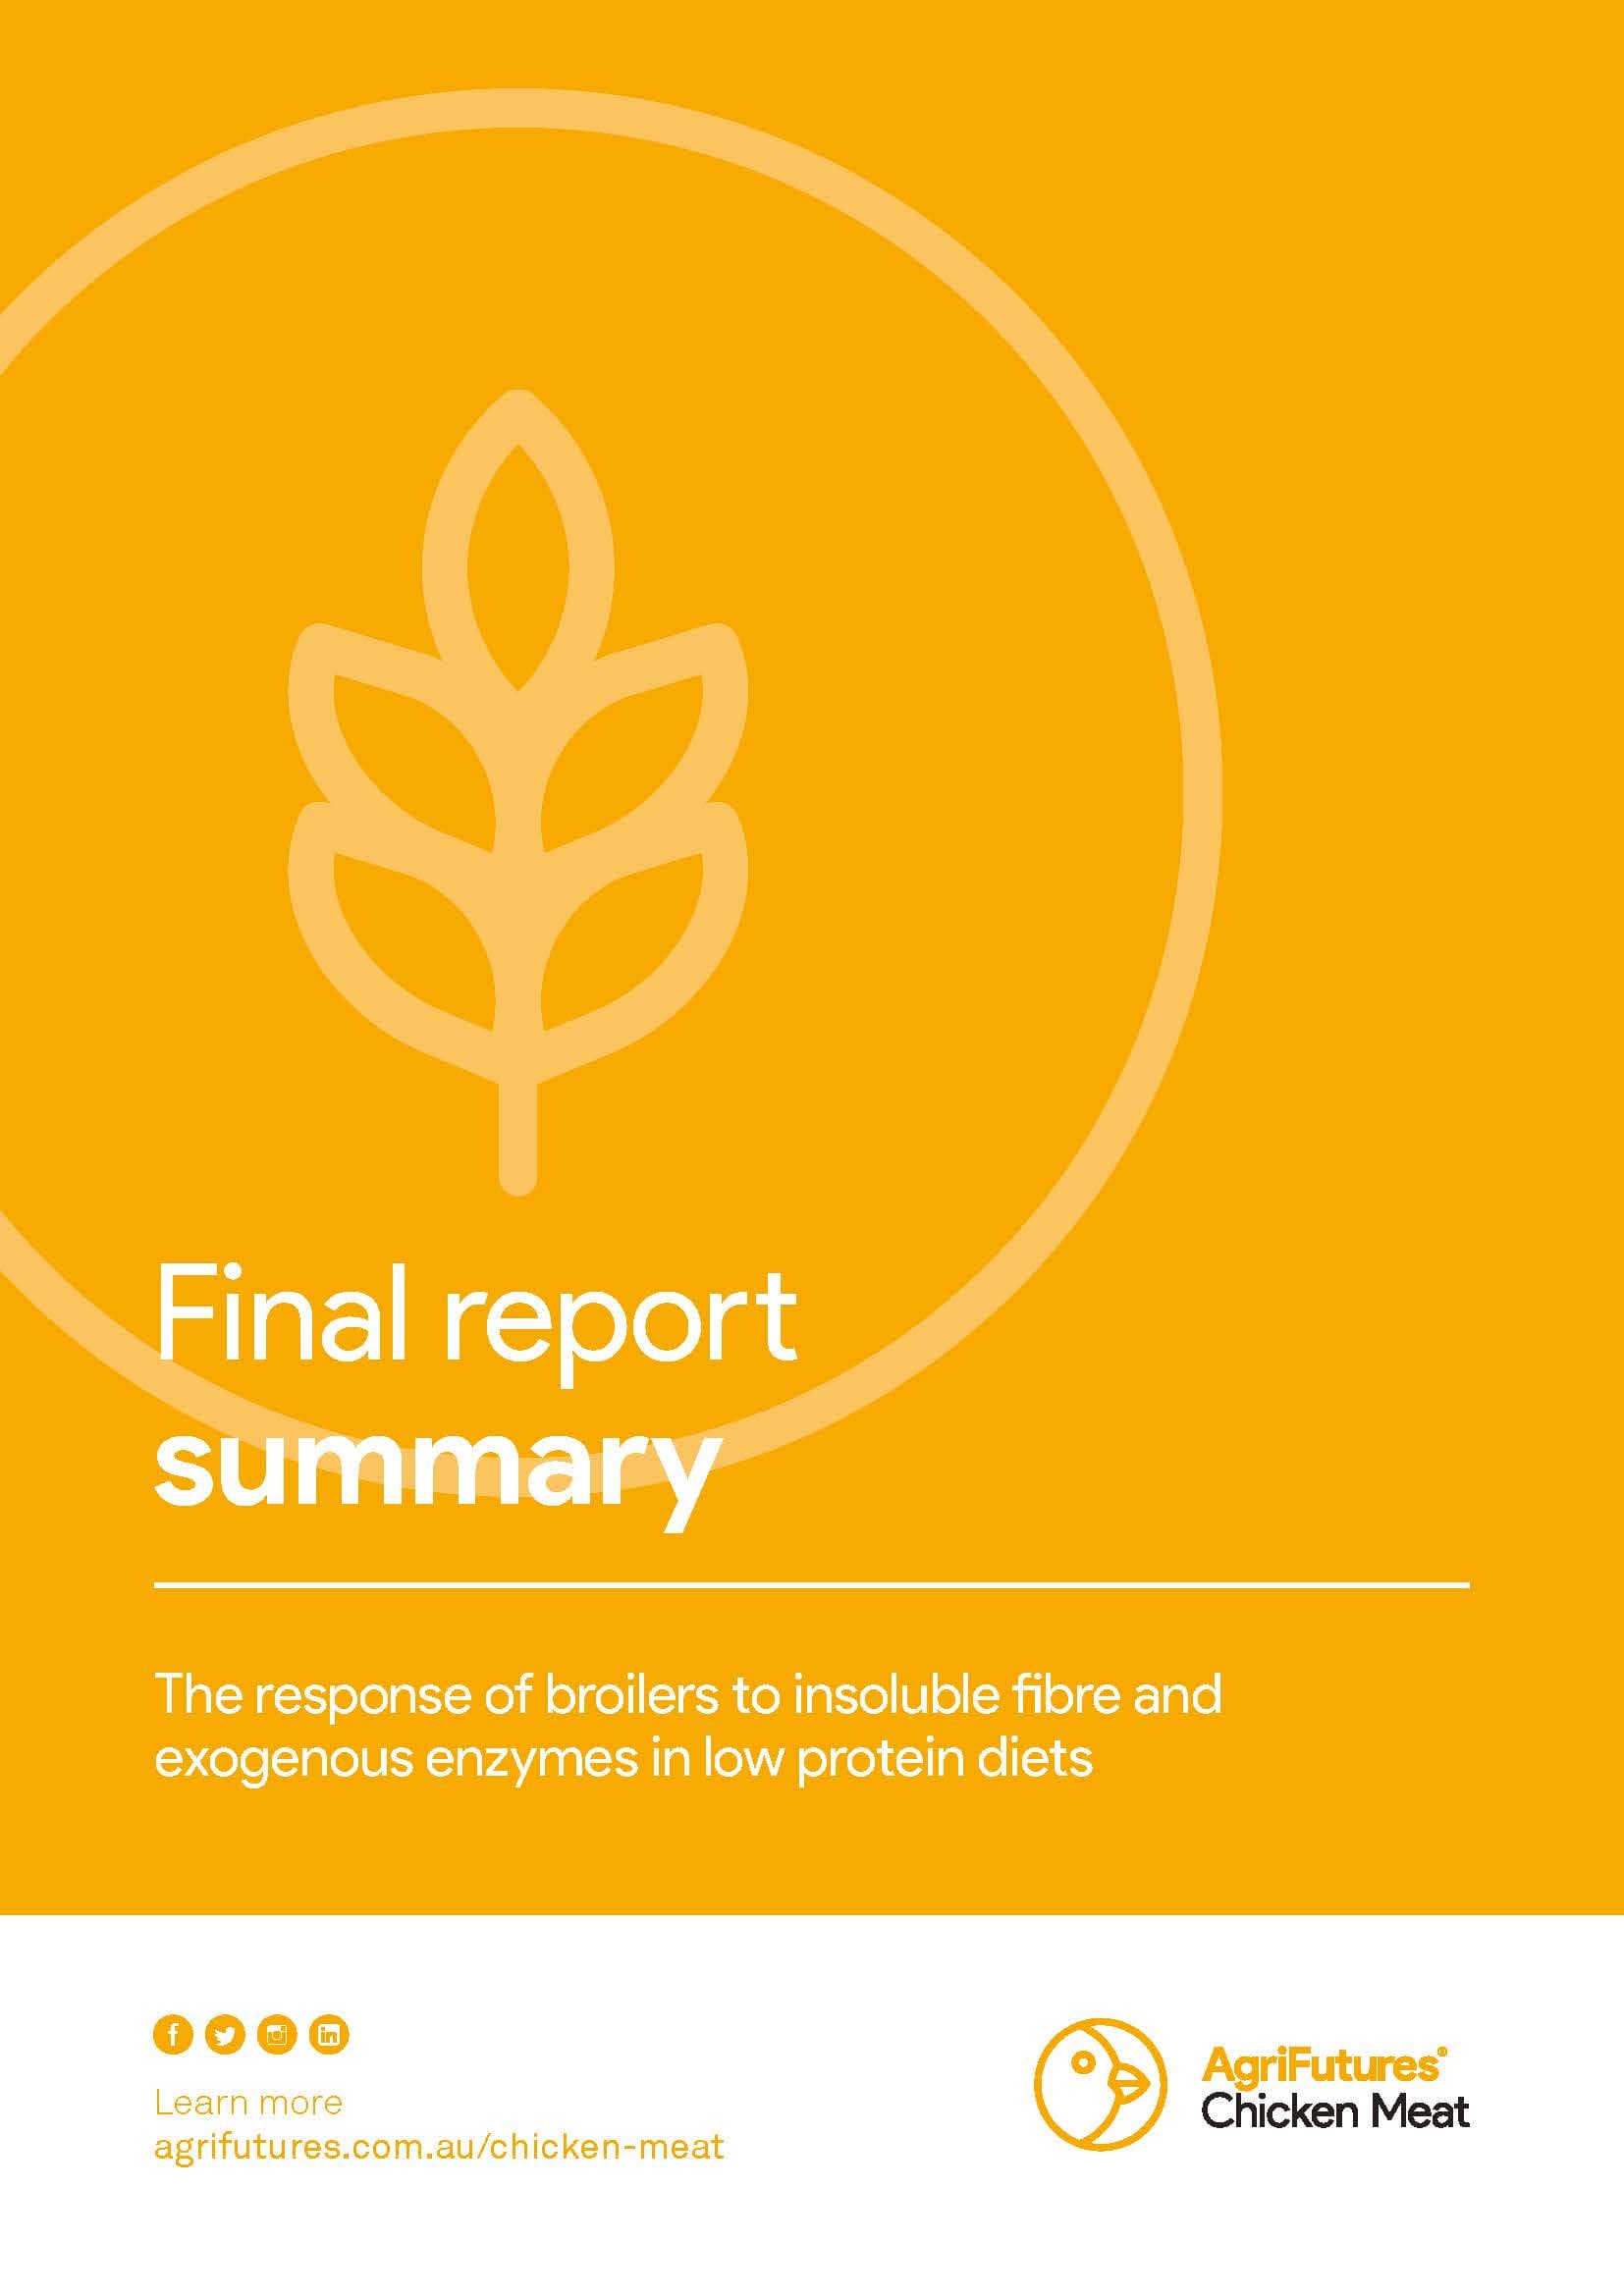 Final report summary: The response of broilers to insoluble fibre and exogenous enzymes in low protein diets - image